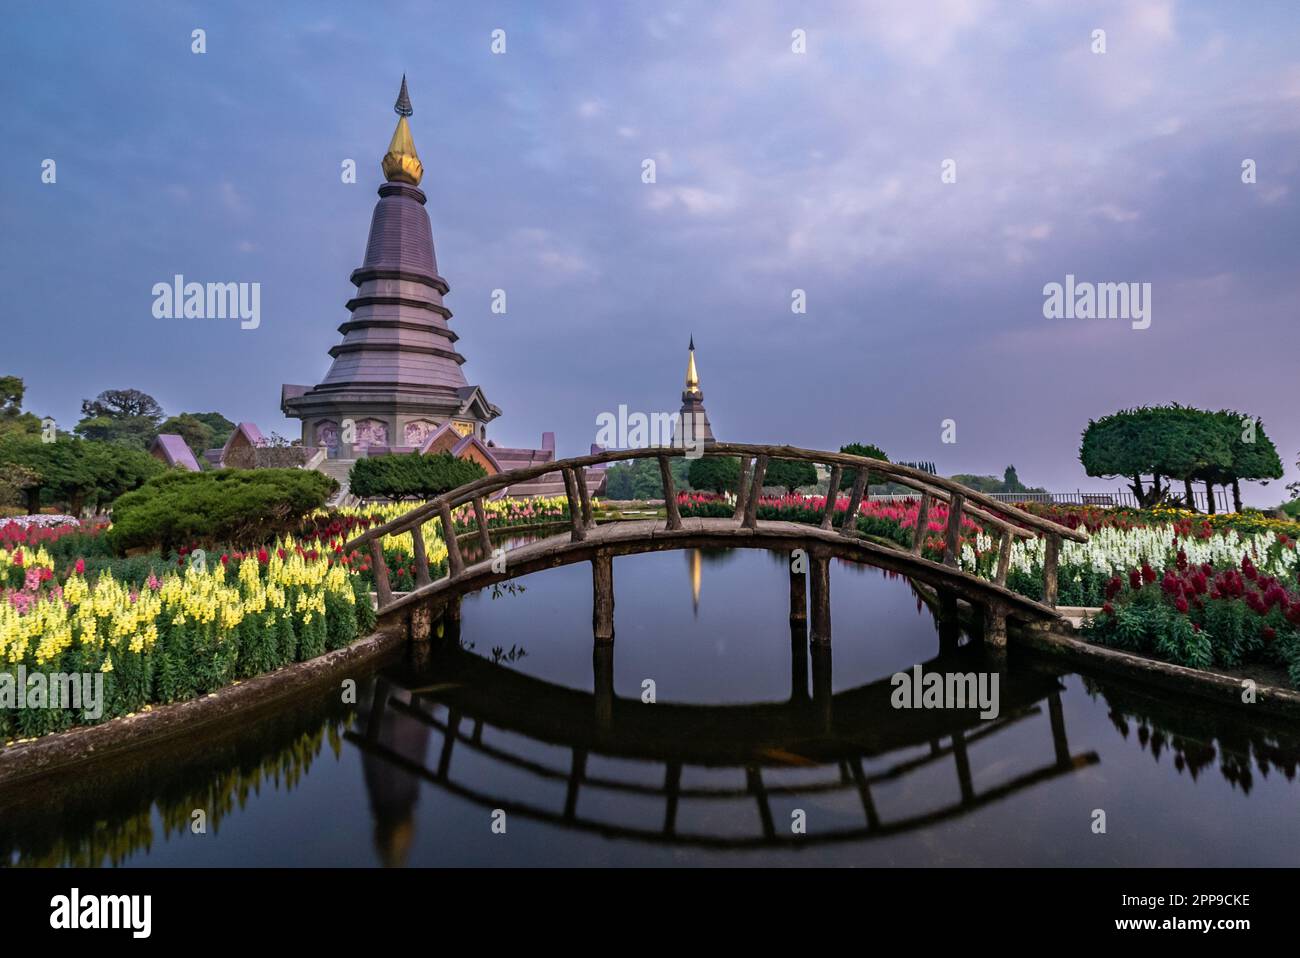 Chiang Mai, Thailand - 18 March 2023 -Phra Mahathat monuments on Doi Inthanon in Chiang Mai, Thailand on a cloudy evening Stock Photo